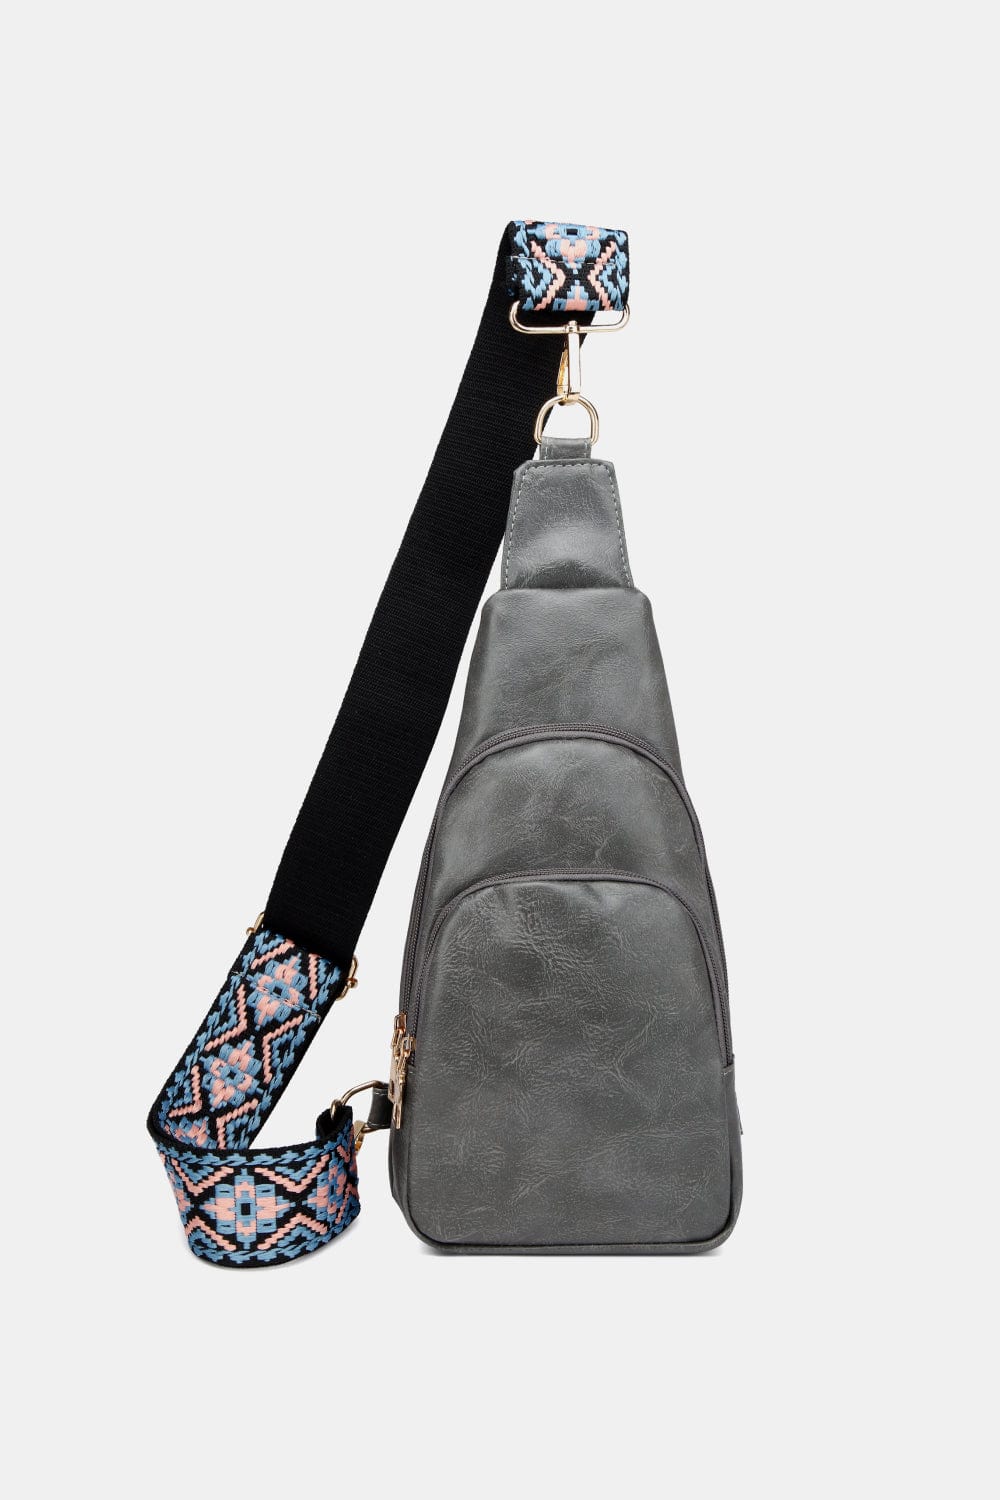 The802Gypsy Handbags, Wallets & Cases Heather Gray / One Size GYPSY-Syled Sling Bag